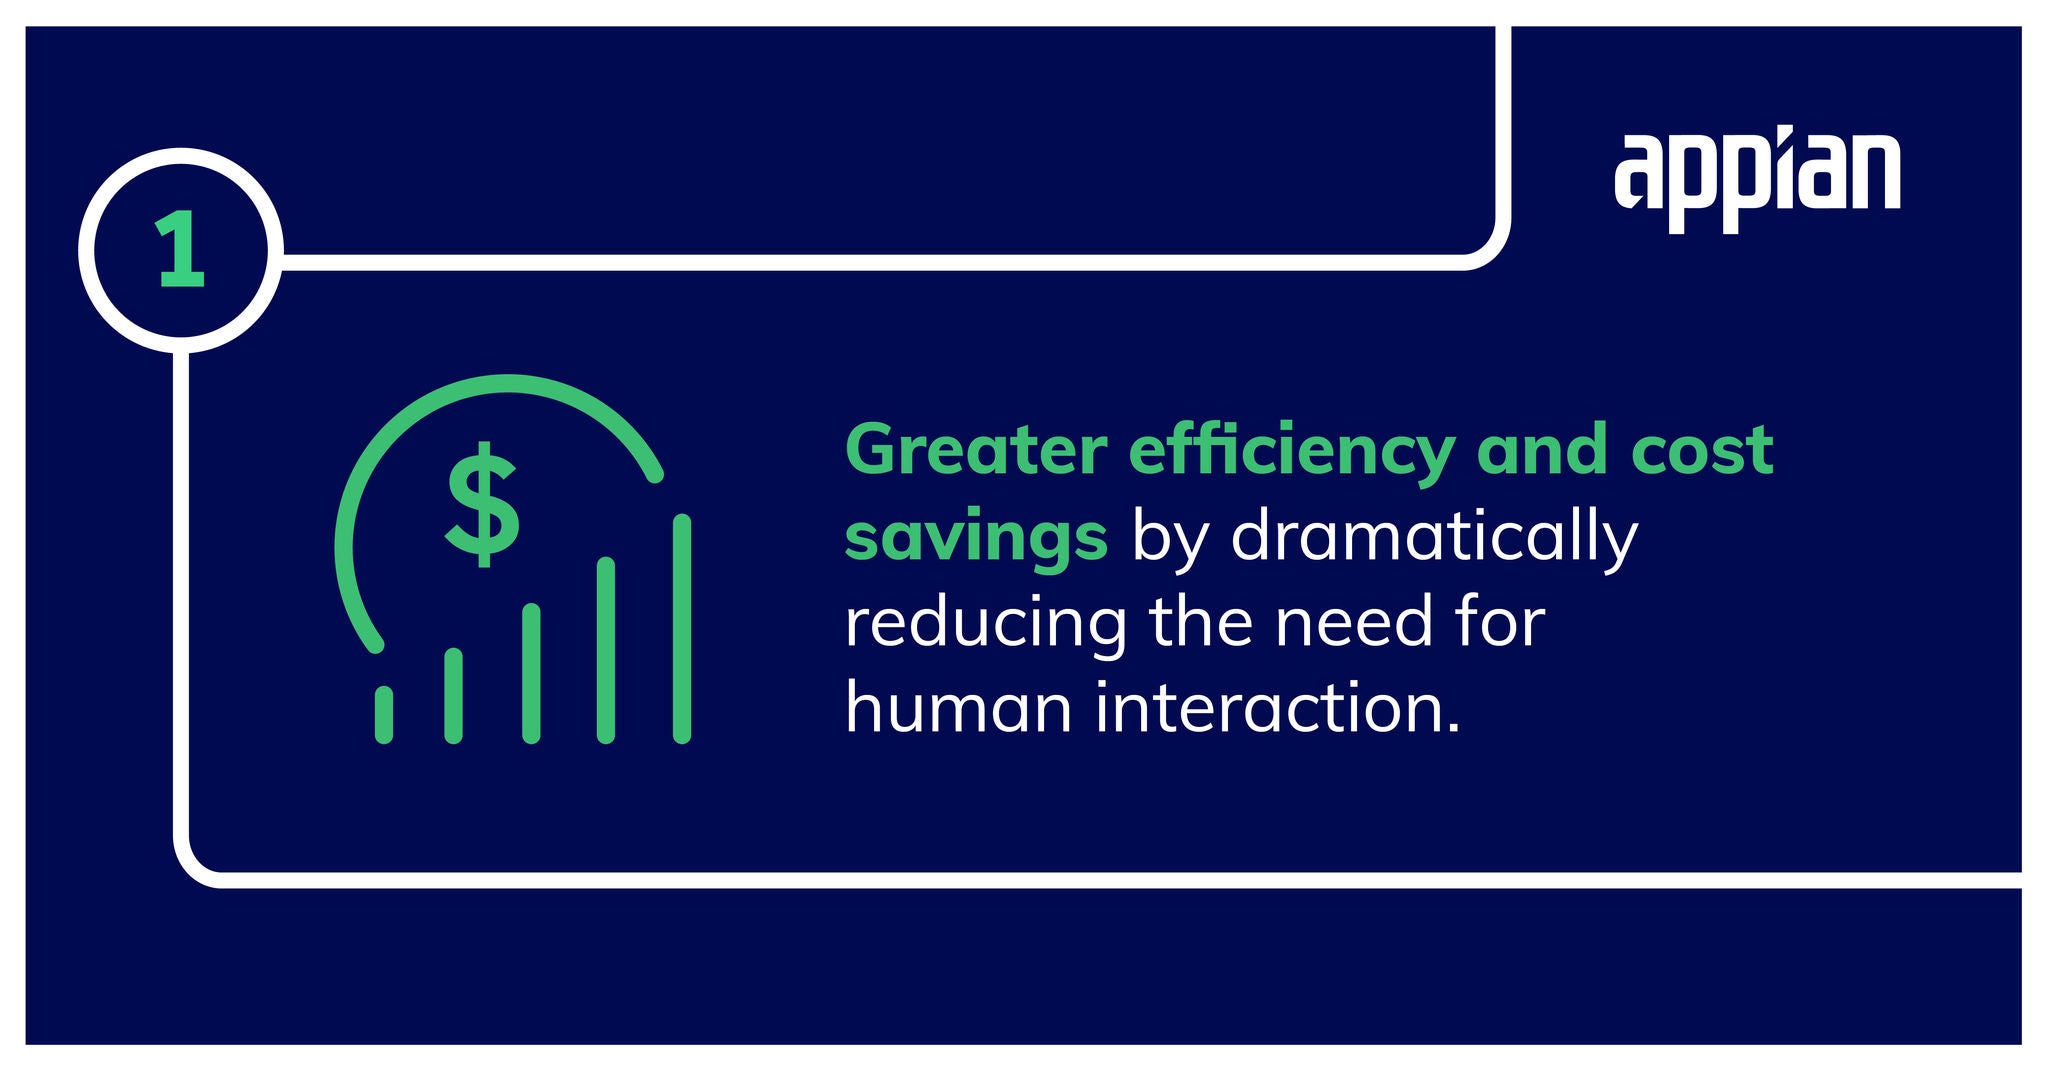 Greater efficiency and cost savings by dramatically reducing the need for human interaction.